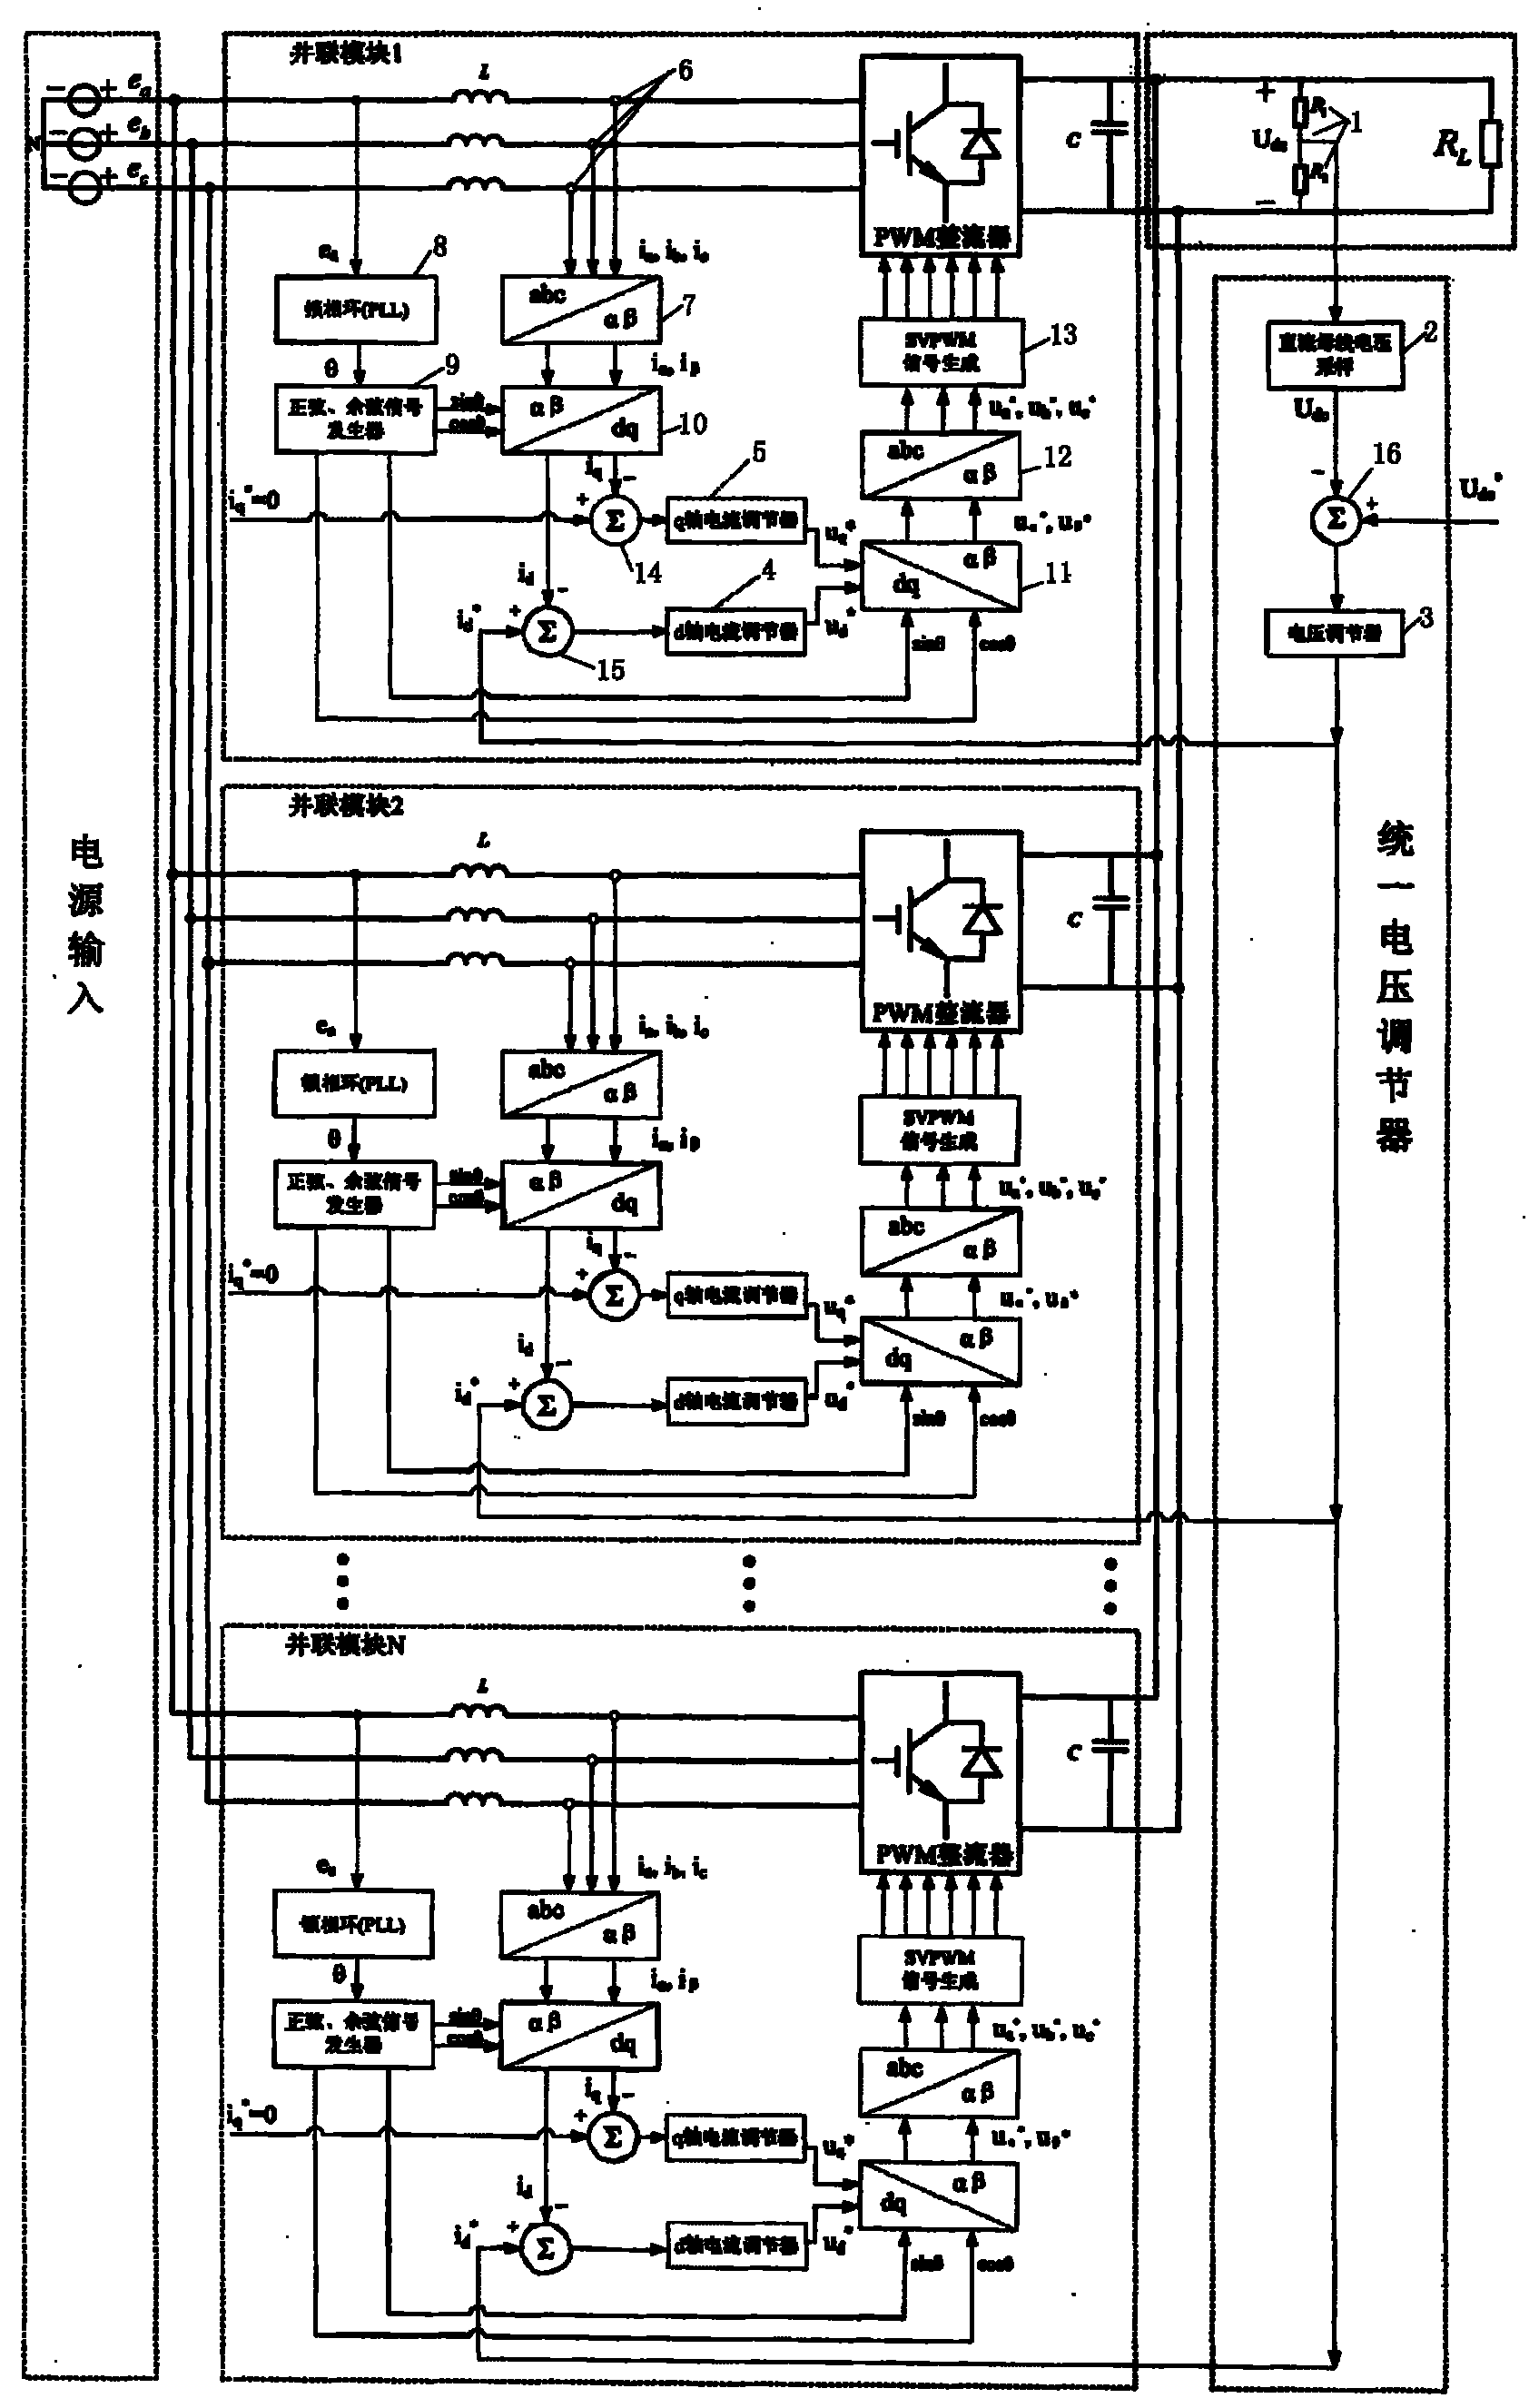 Parallel structure of voltage source type PWM (Pulse Width Modulation) rectifier and control method of the rectifier